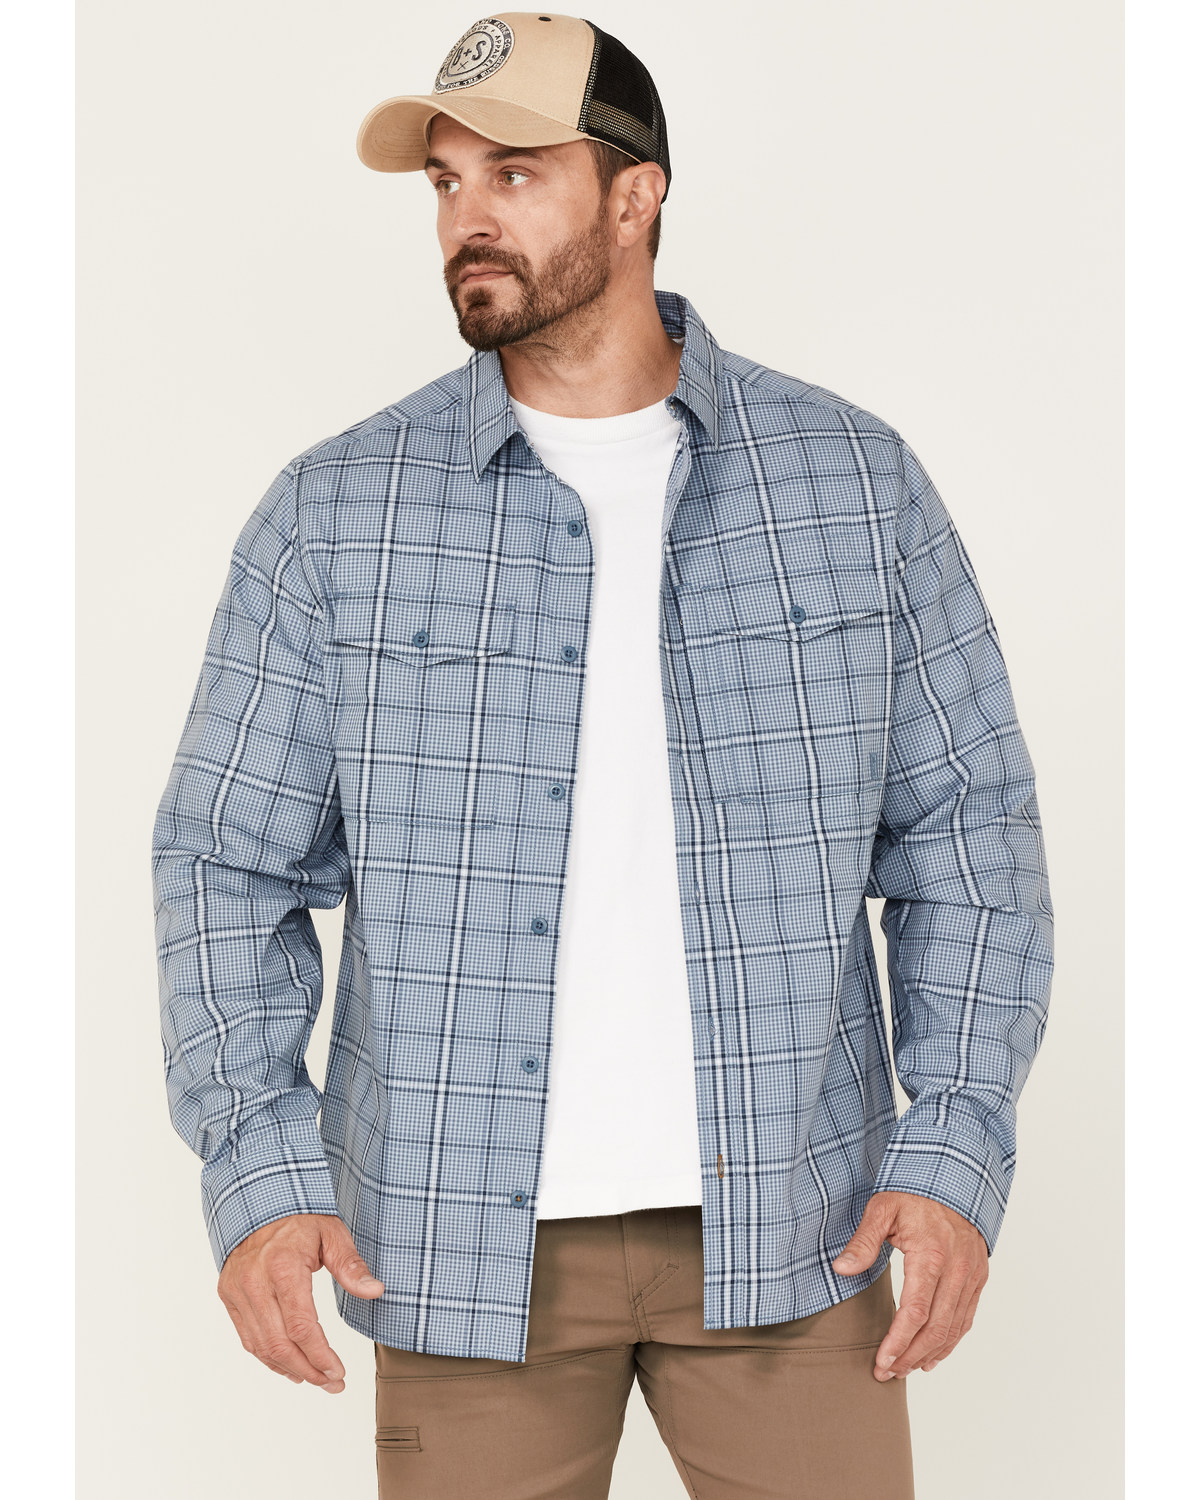 Brothers and Sons Men's Plaid Performance Long Sleeve Button-Down Western Shirt